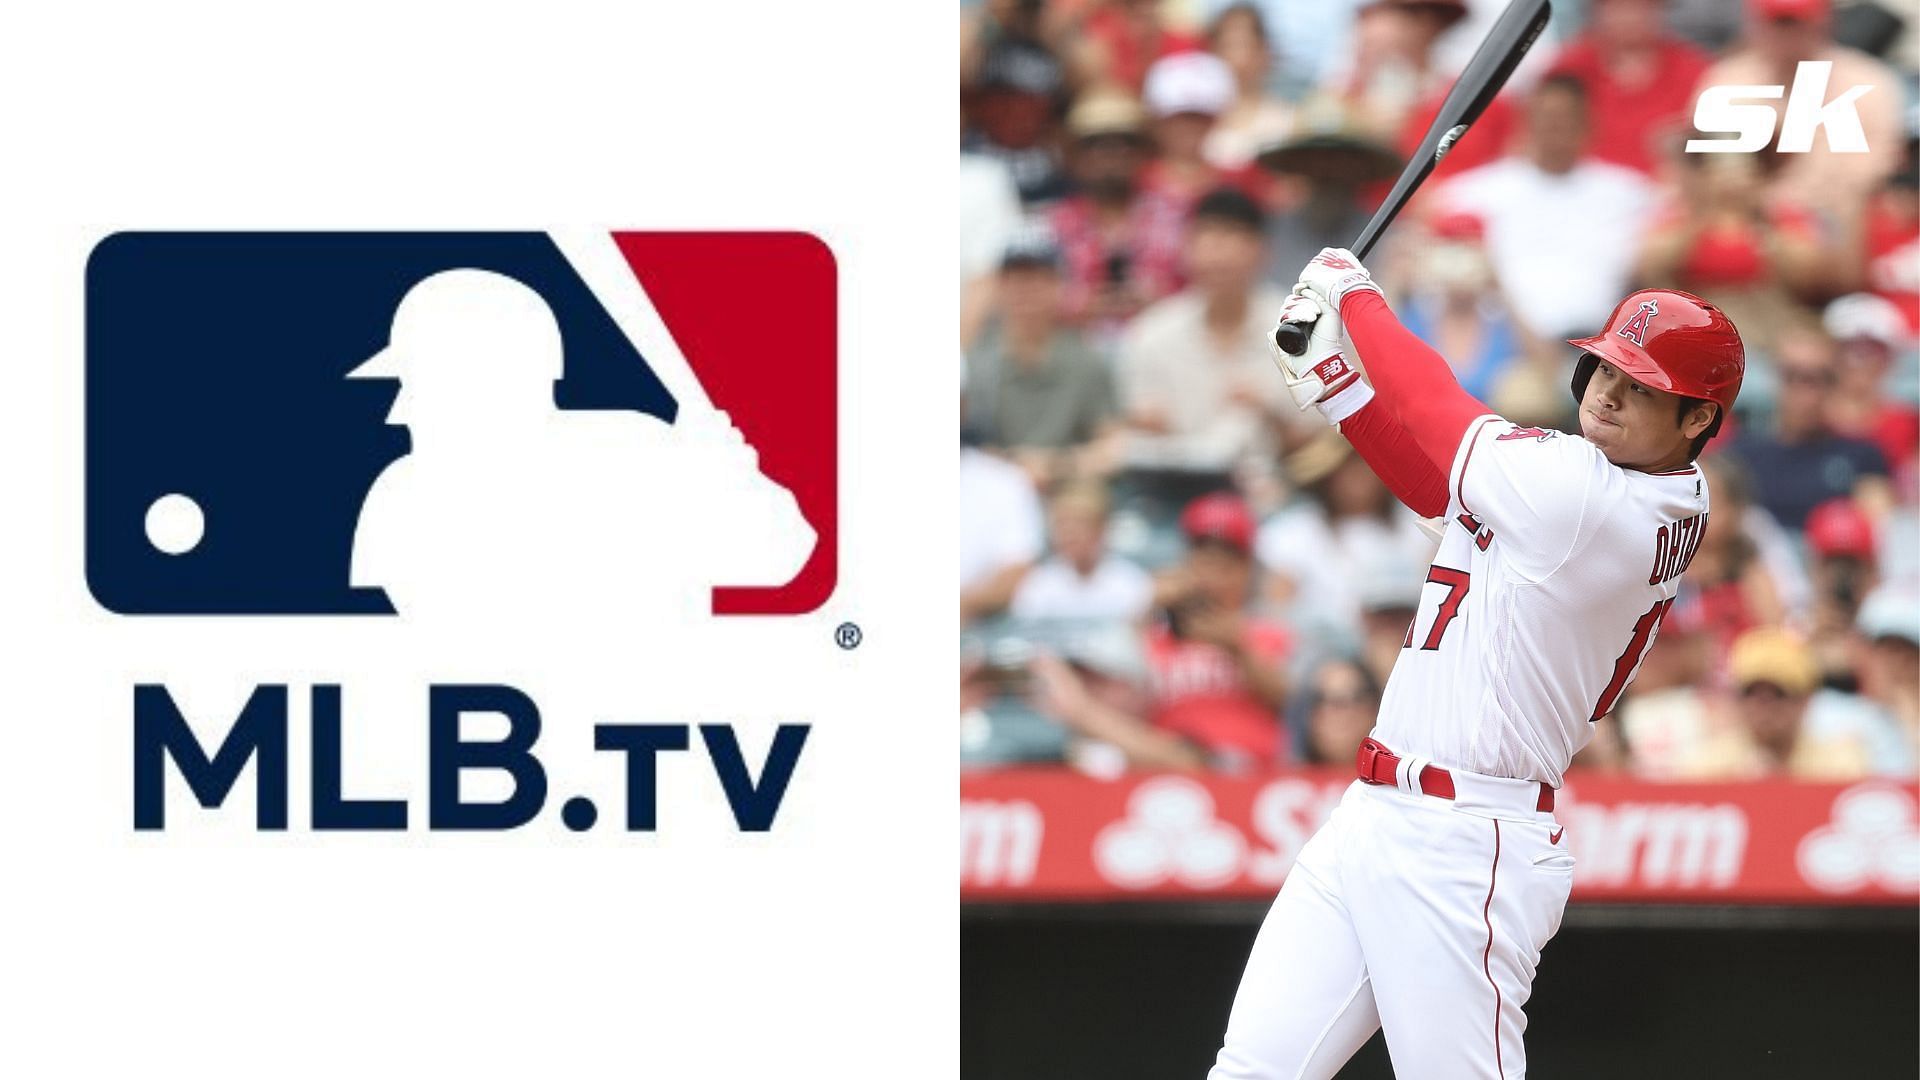 MLB TV College students: Can College students watch MLB TV for